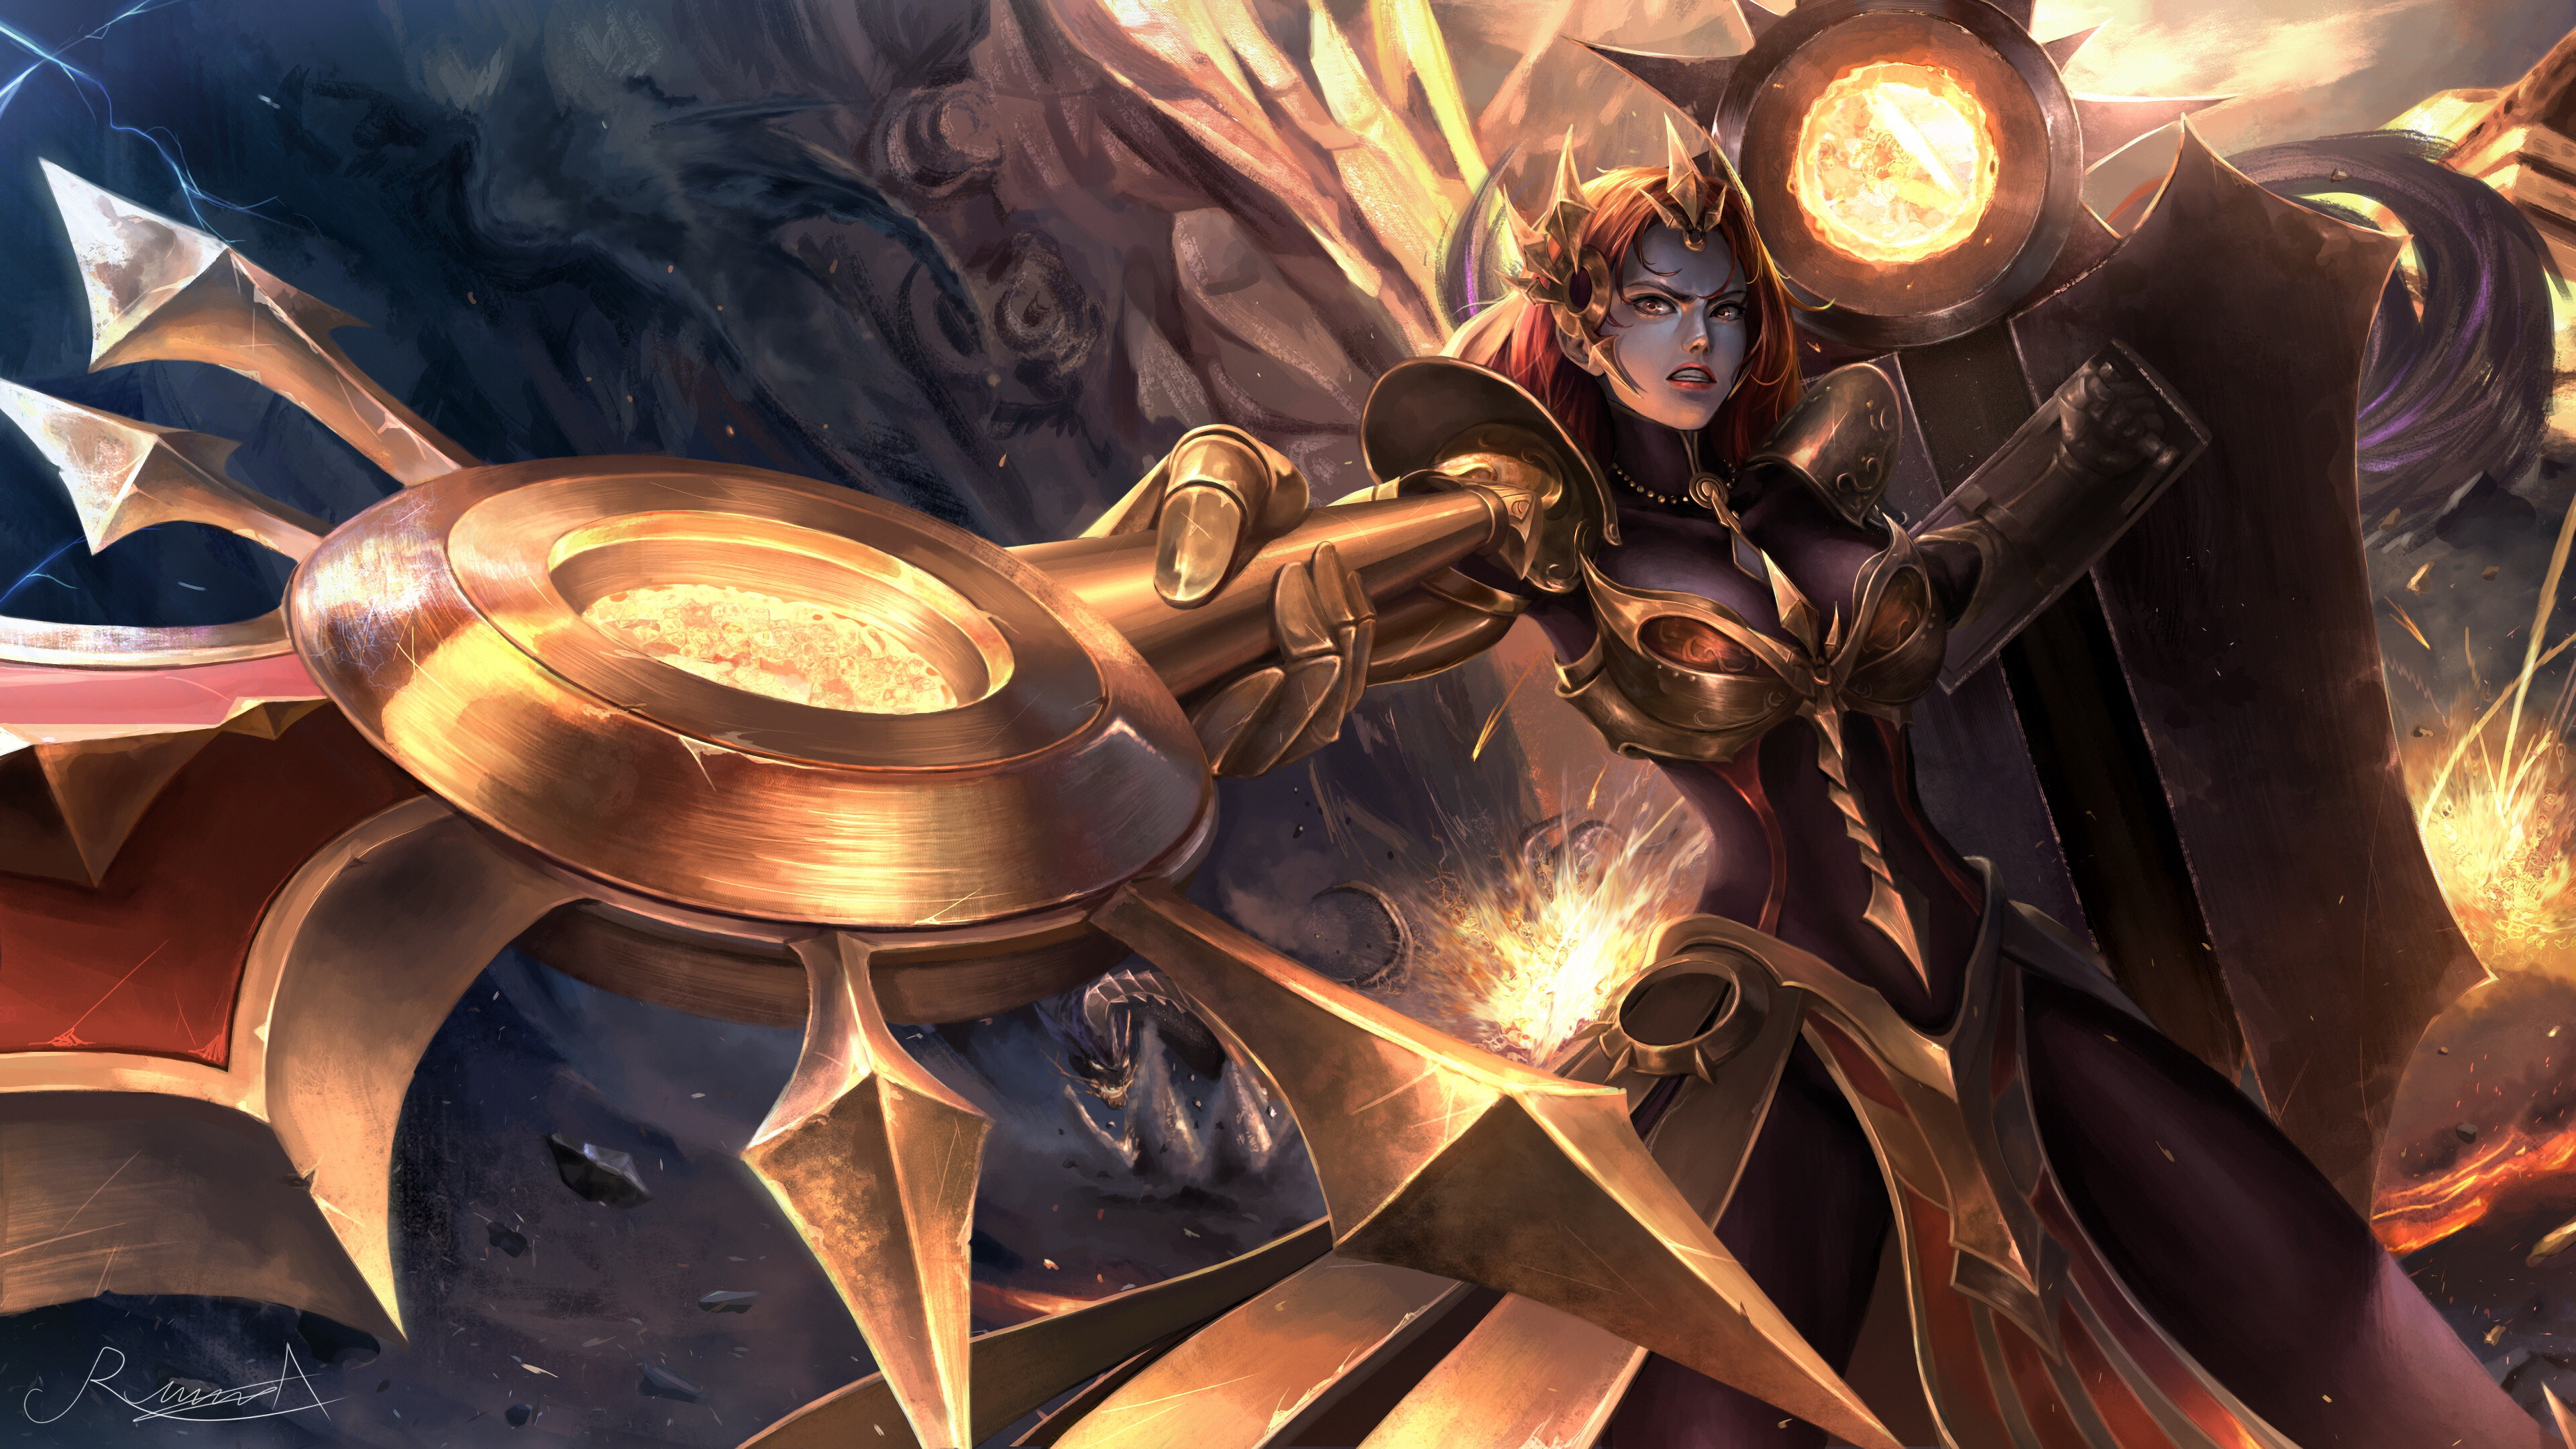 League of Legends: Leona, LoL, Defends Mount Targon using her Zenith Blade and Shield for Daybreak. 3840x2160 4K Background.